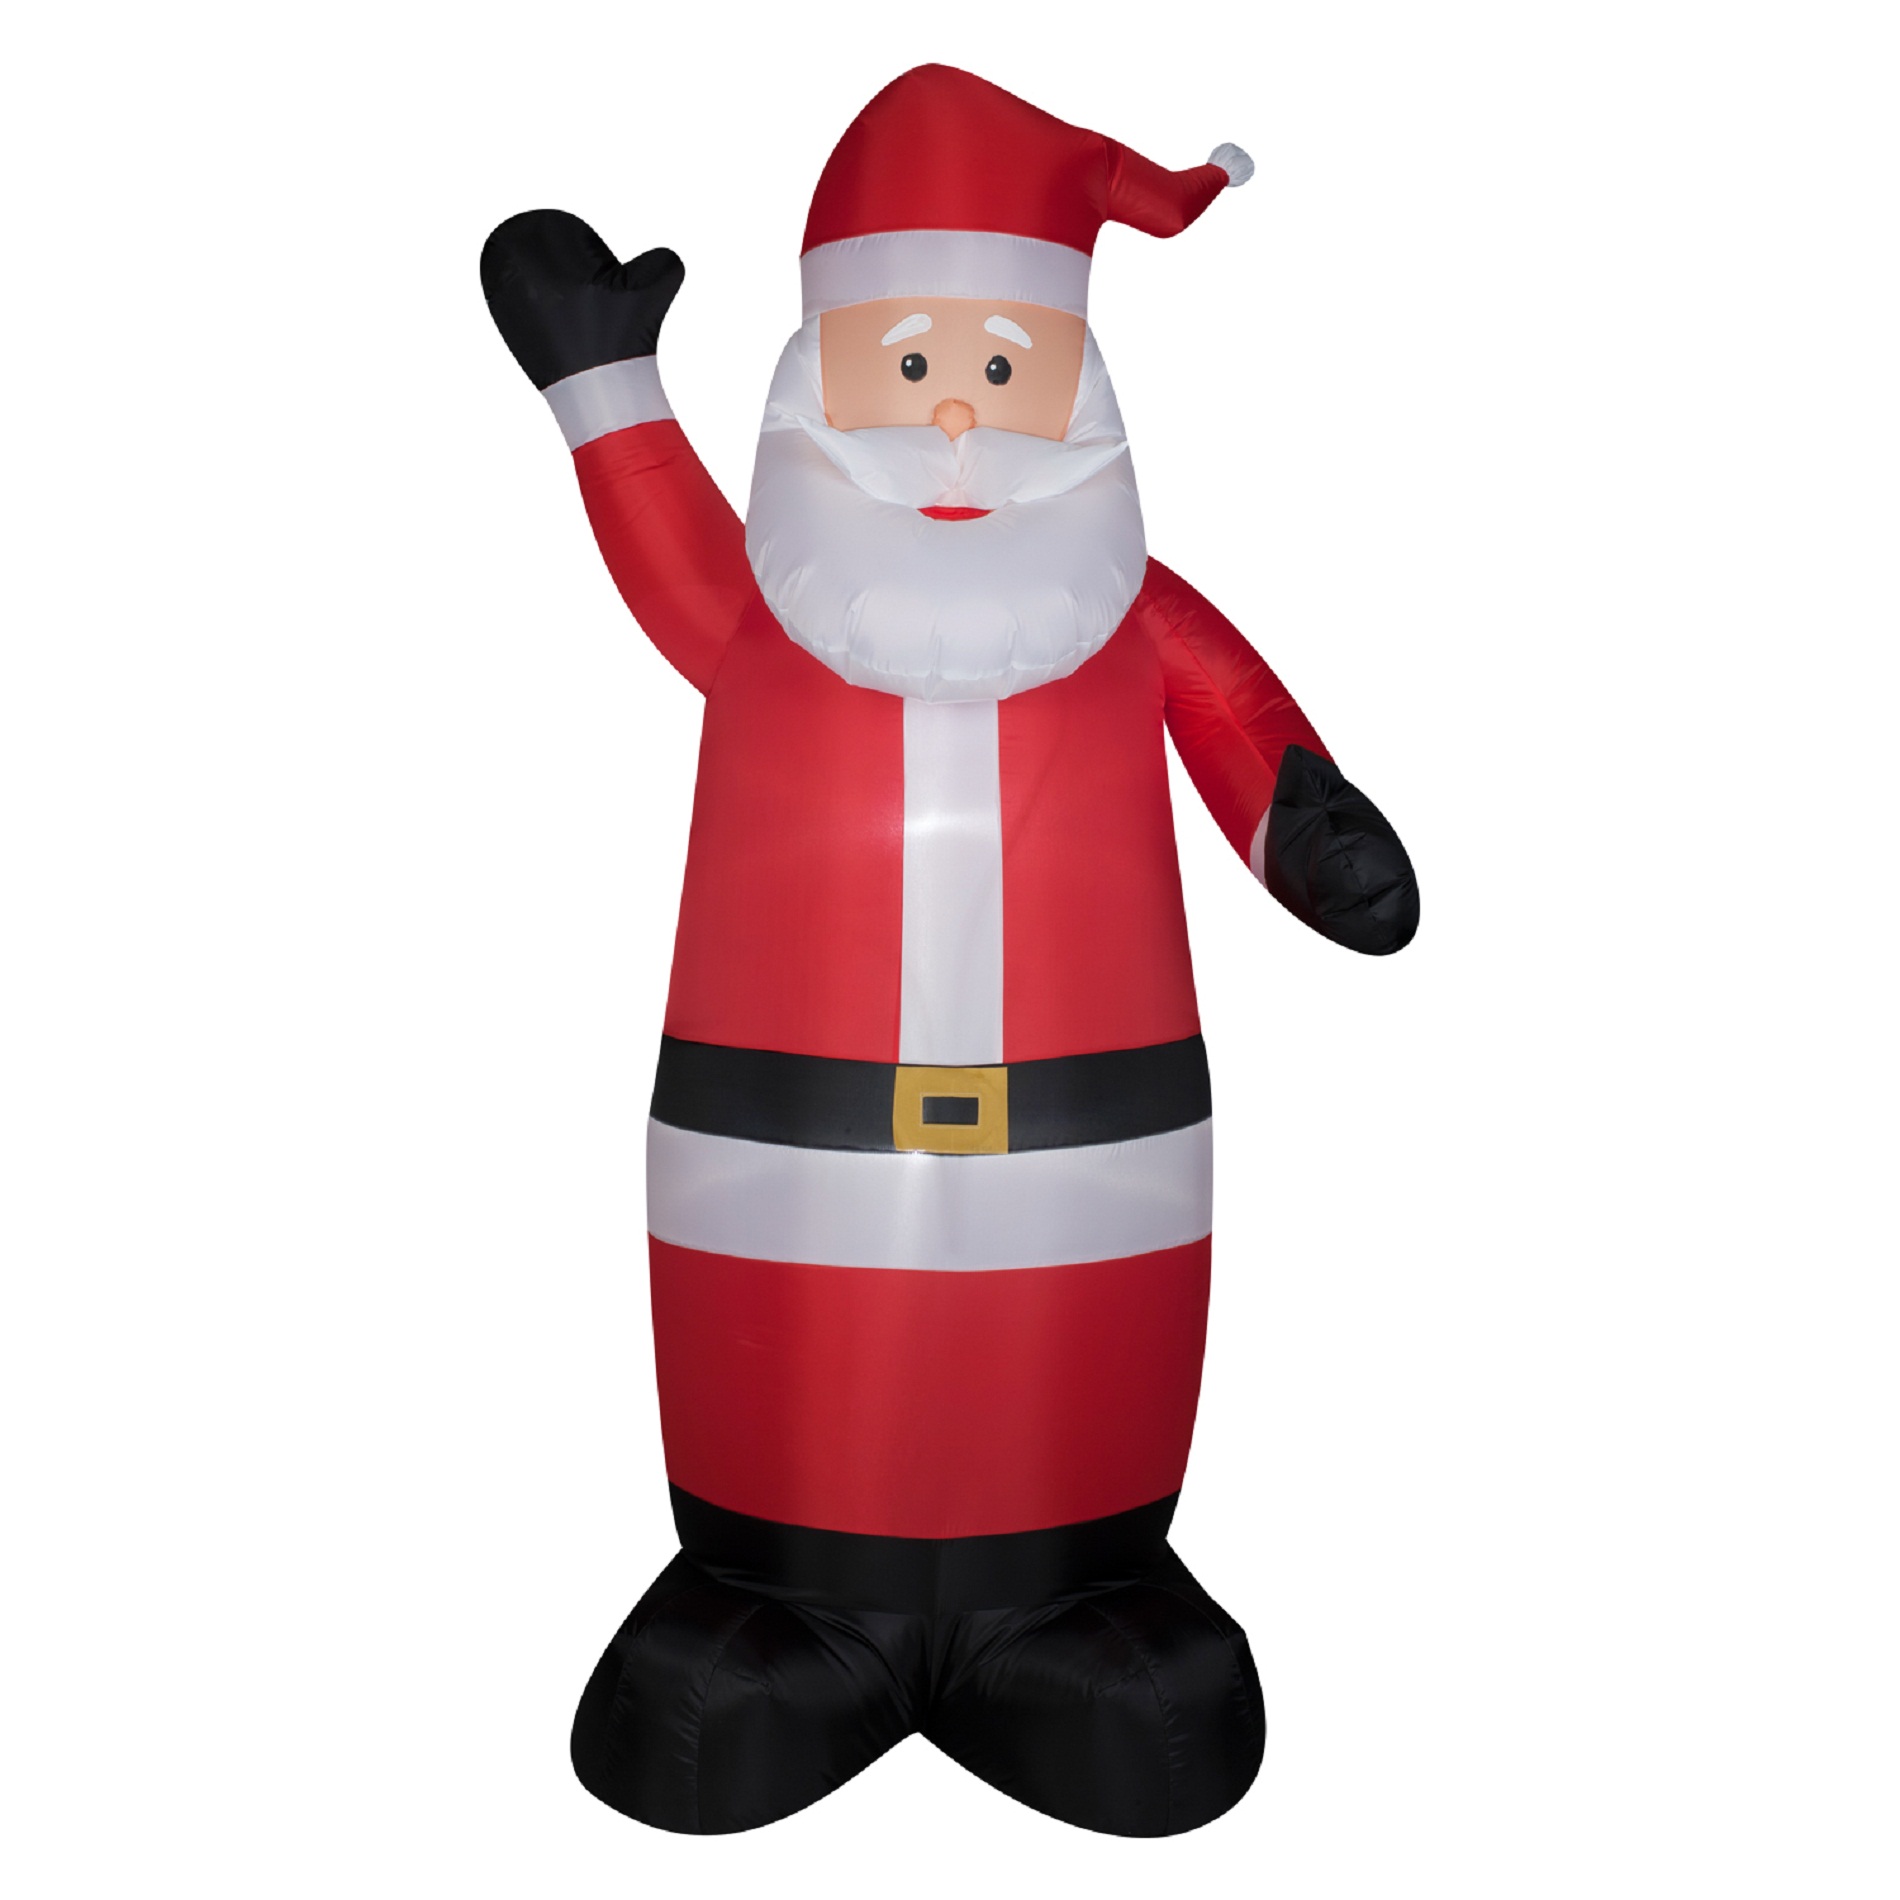 Trimming Traditions Christmas Outdoor Decorations Santa Airblown, 6 ft